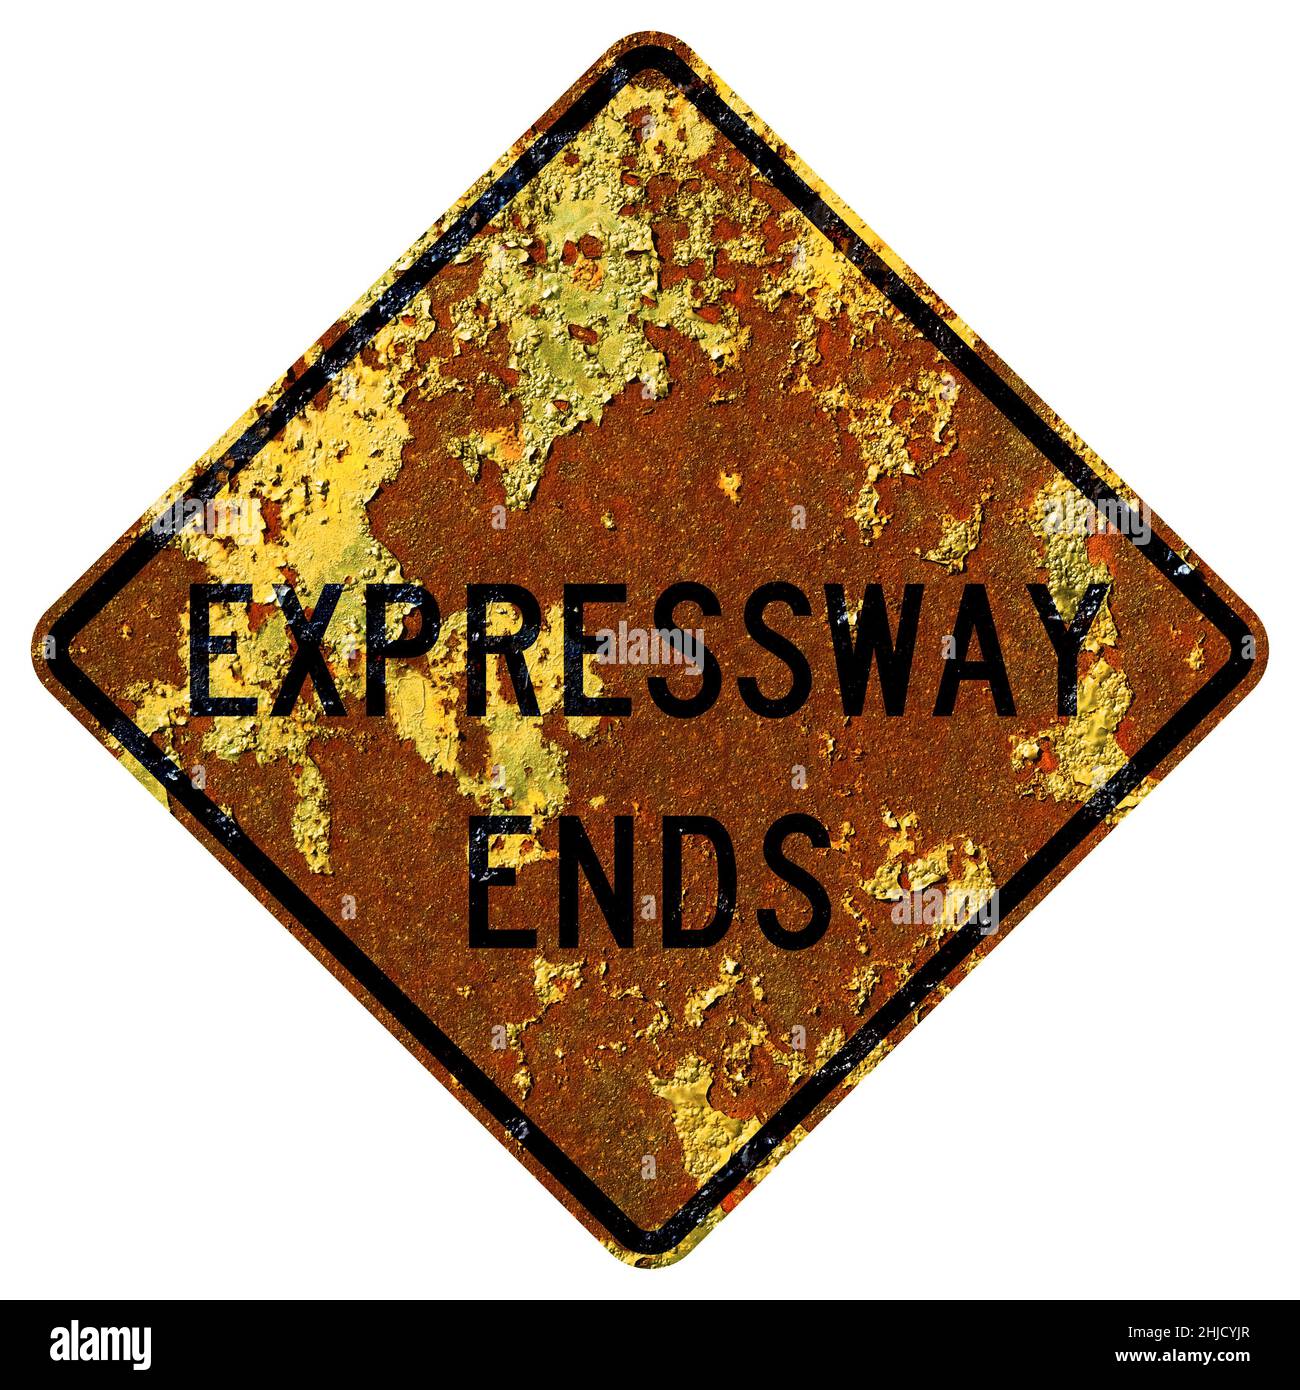 Panneau Old Rusty American Road - Expressway se termine Banque D'Images